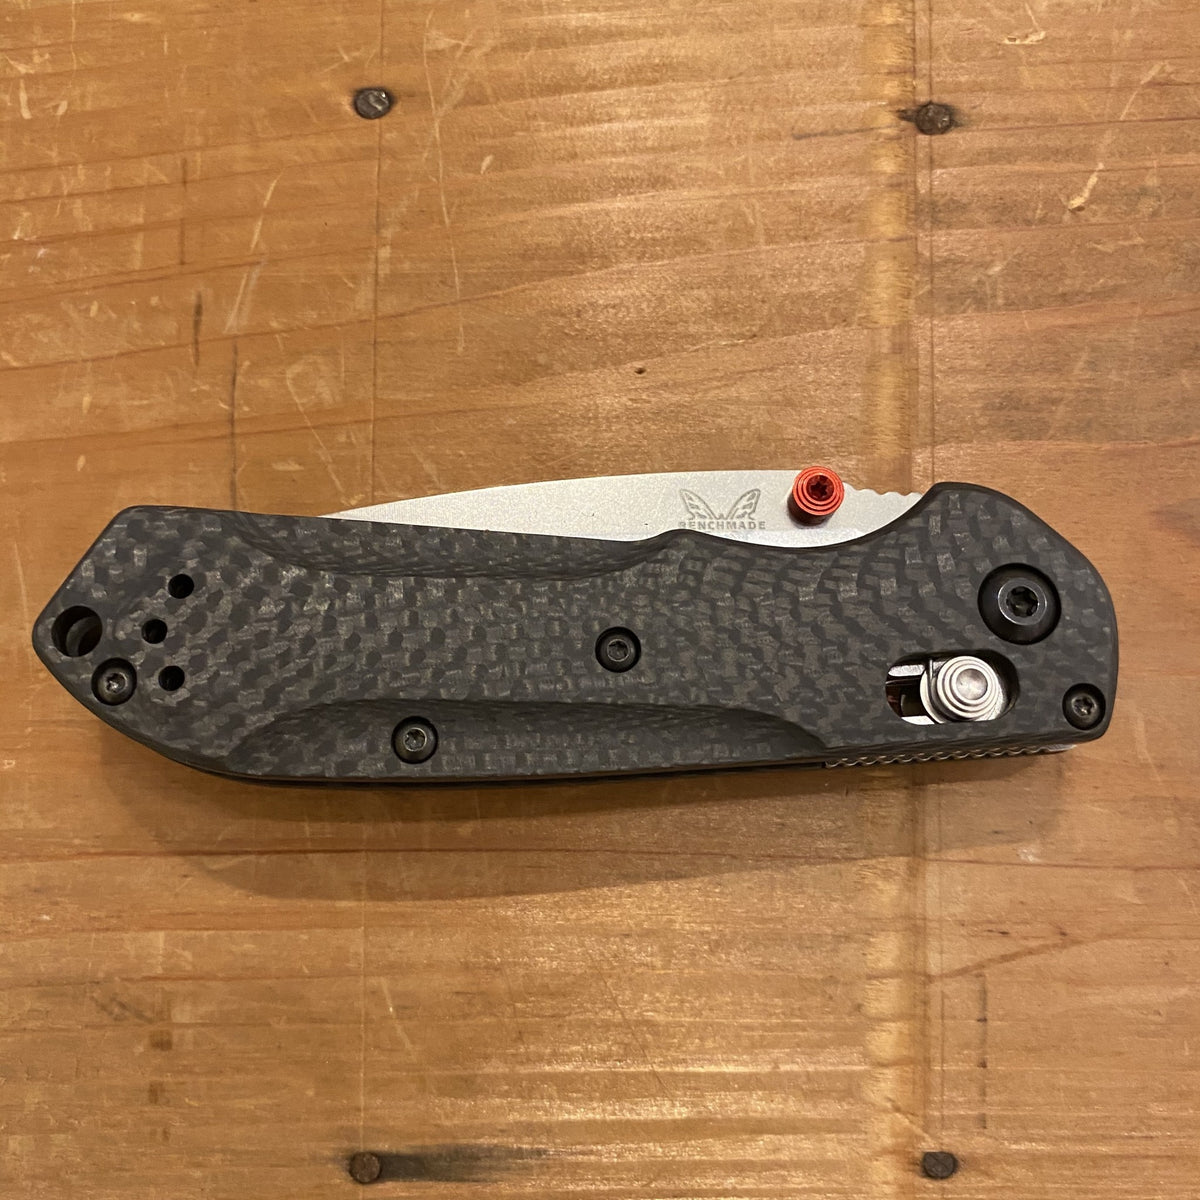 Benchmade Mini Freek Folder Carbon Fiber Scales and True Red